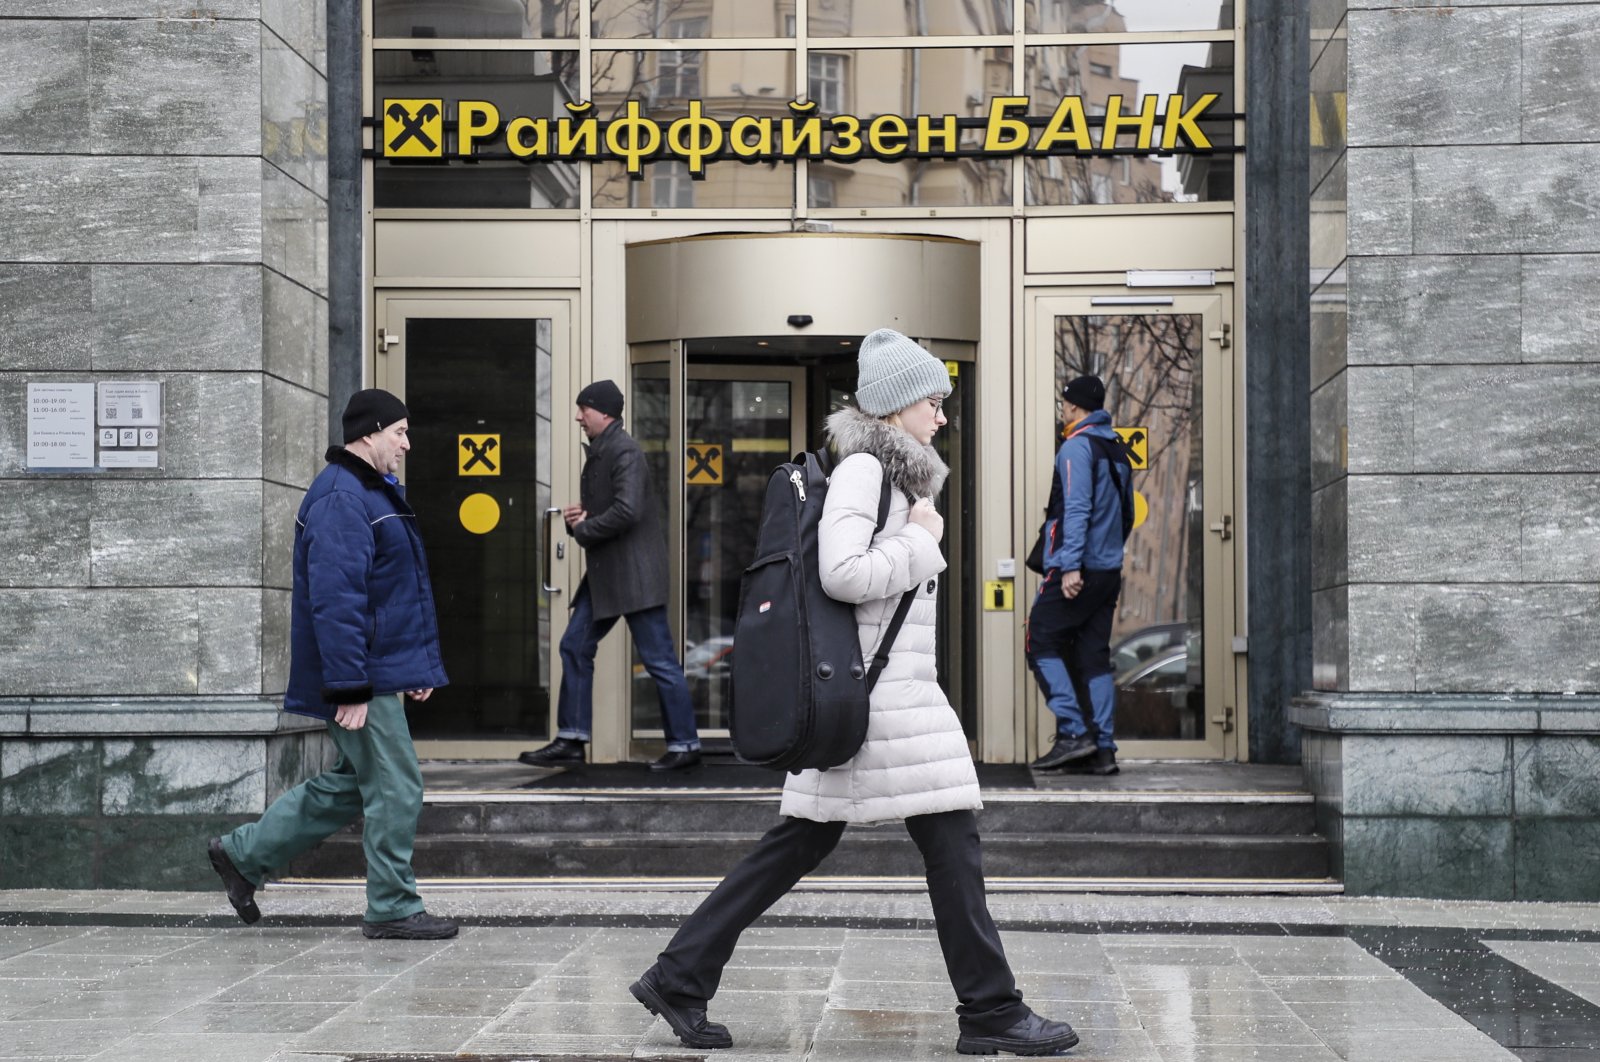 People walk in front of Raiffeisen bank in Moscow, Russia, March 16, 2023. (EPA Photo)